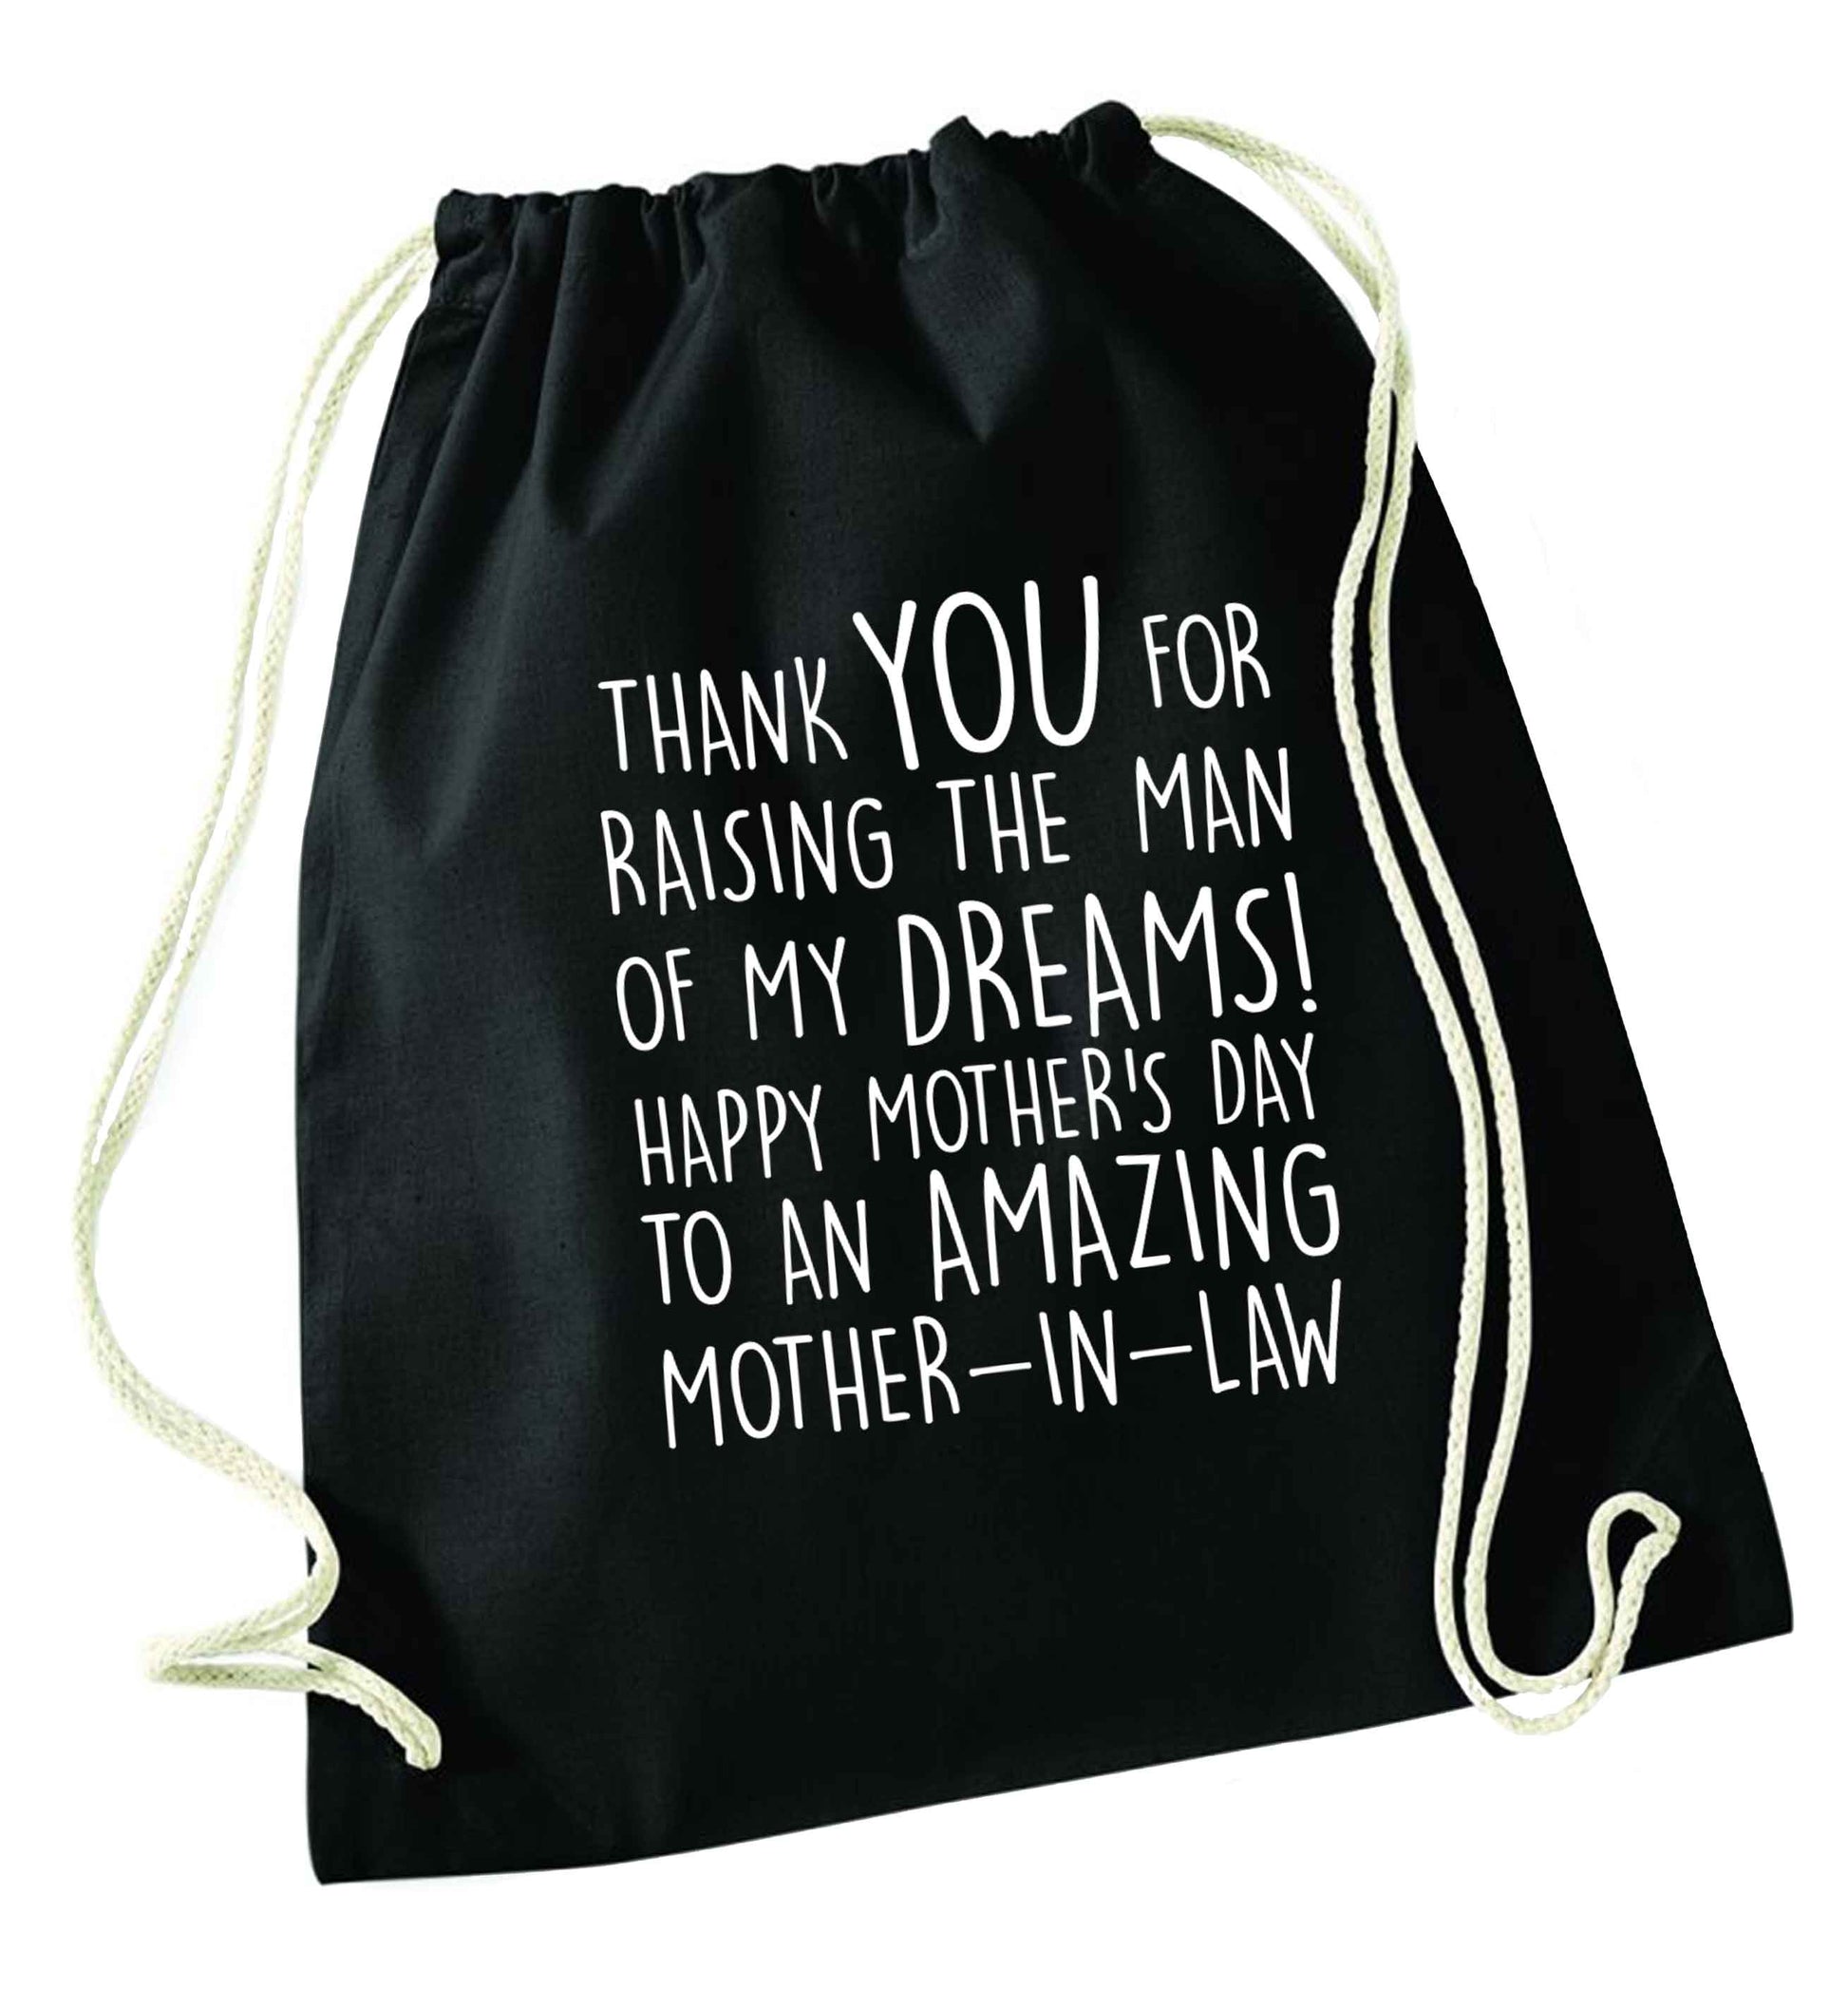 Raising the man of my dreams mother's day mother-in-law black drawstring bag